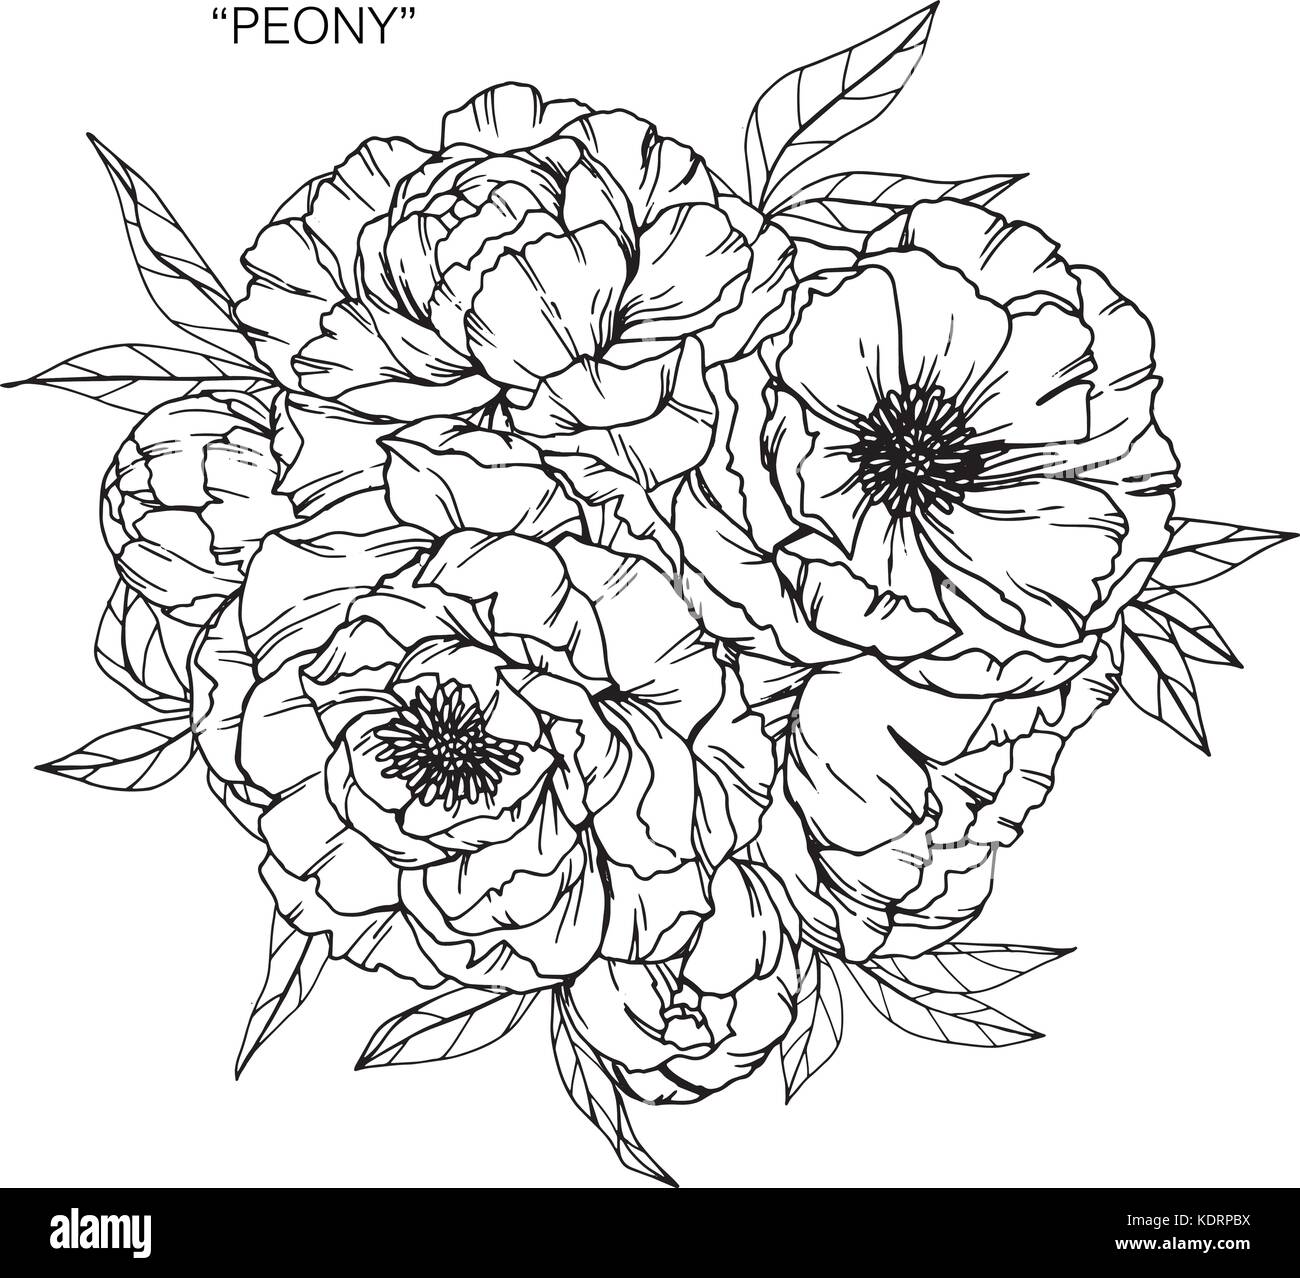 Bouquet of peony flowers drawing. Stock Vector